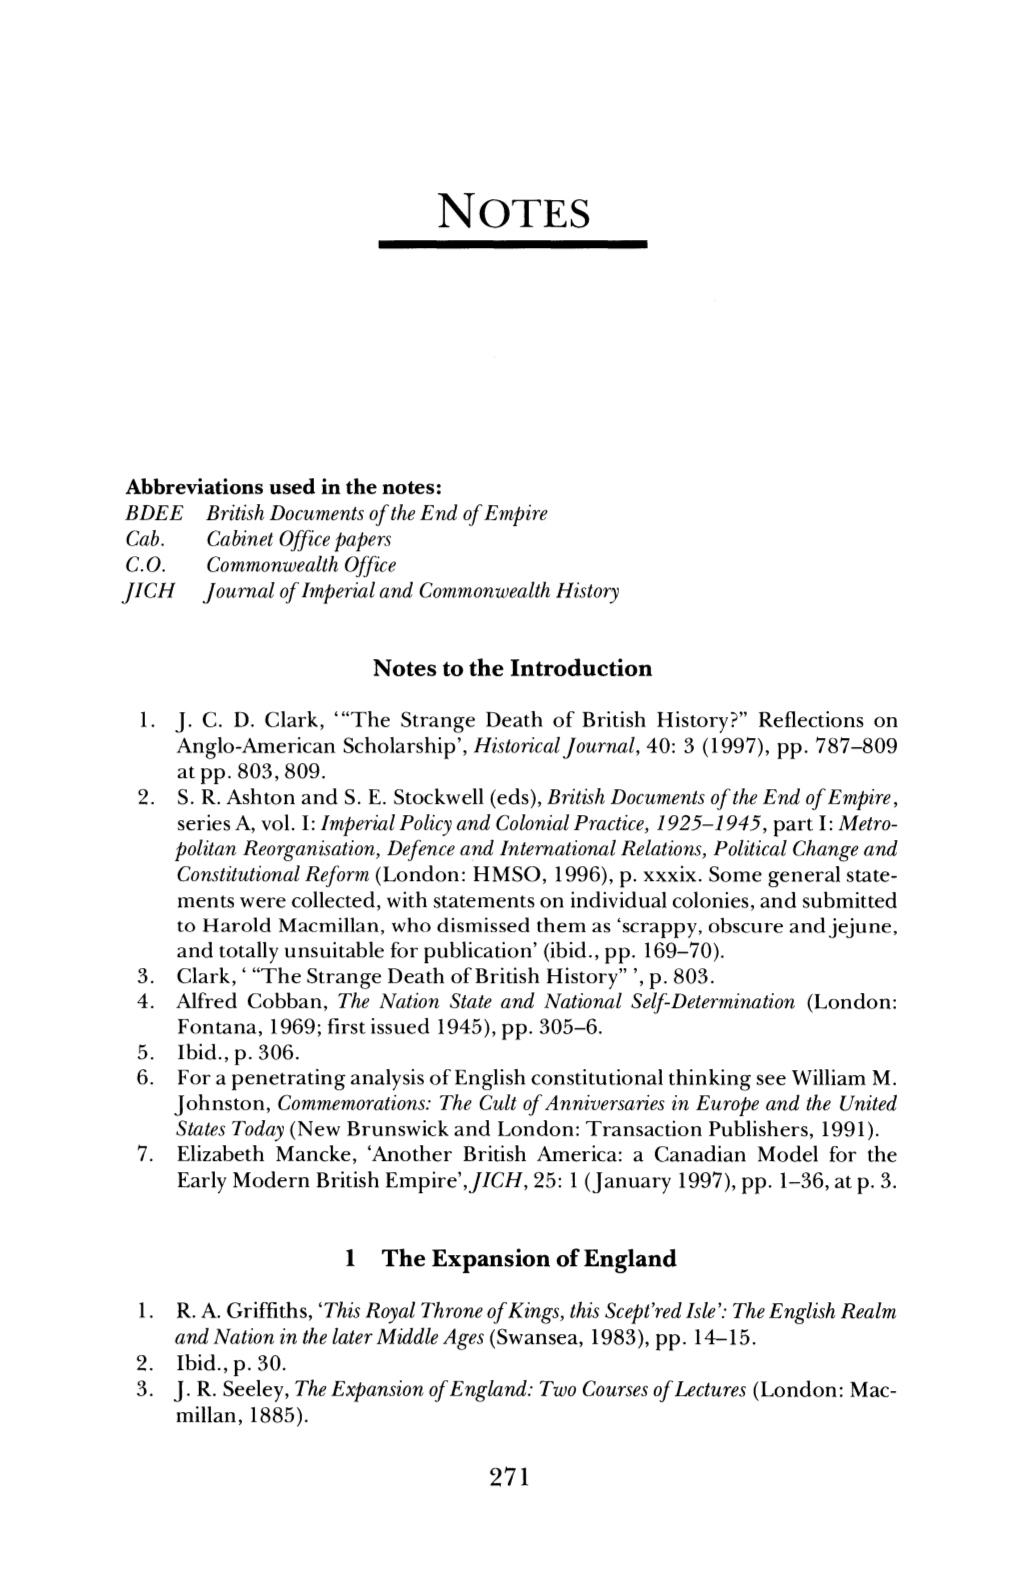 Notes to the Introduction I the Expansion of England